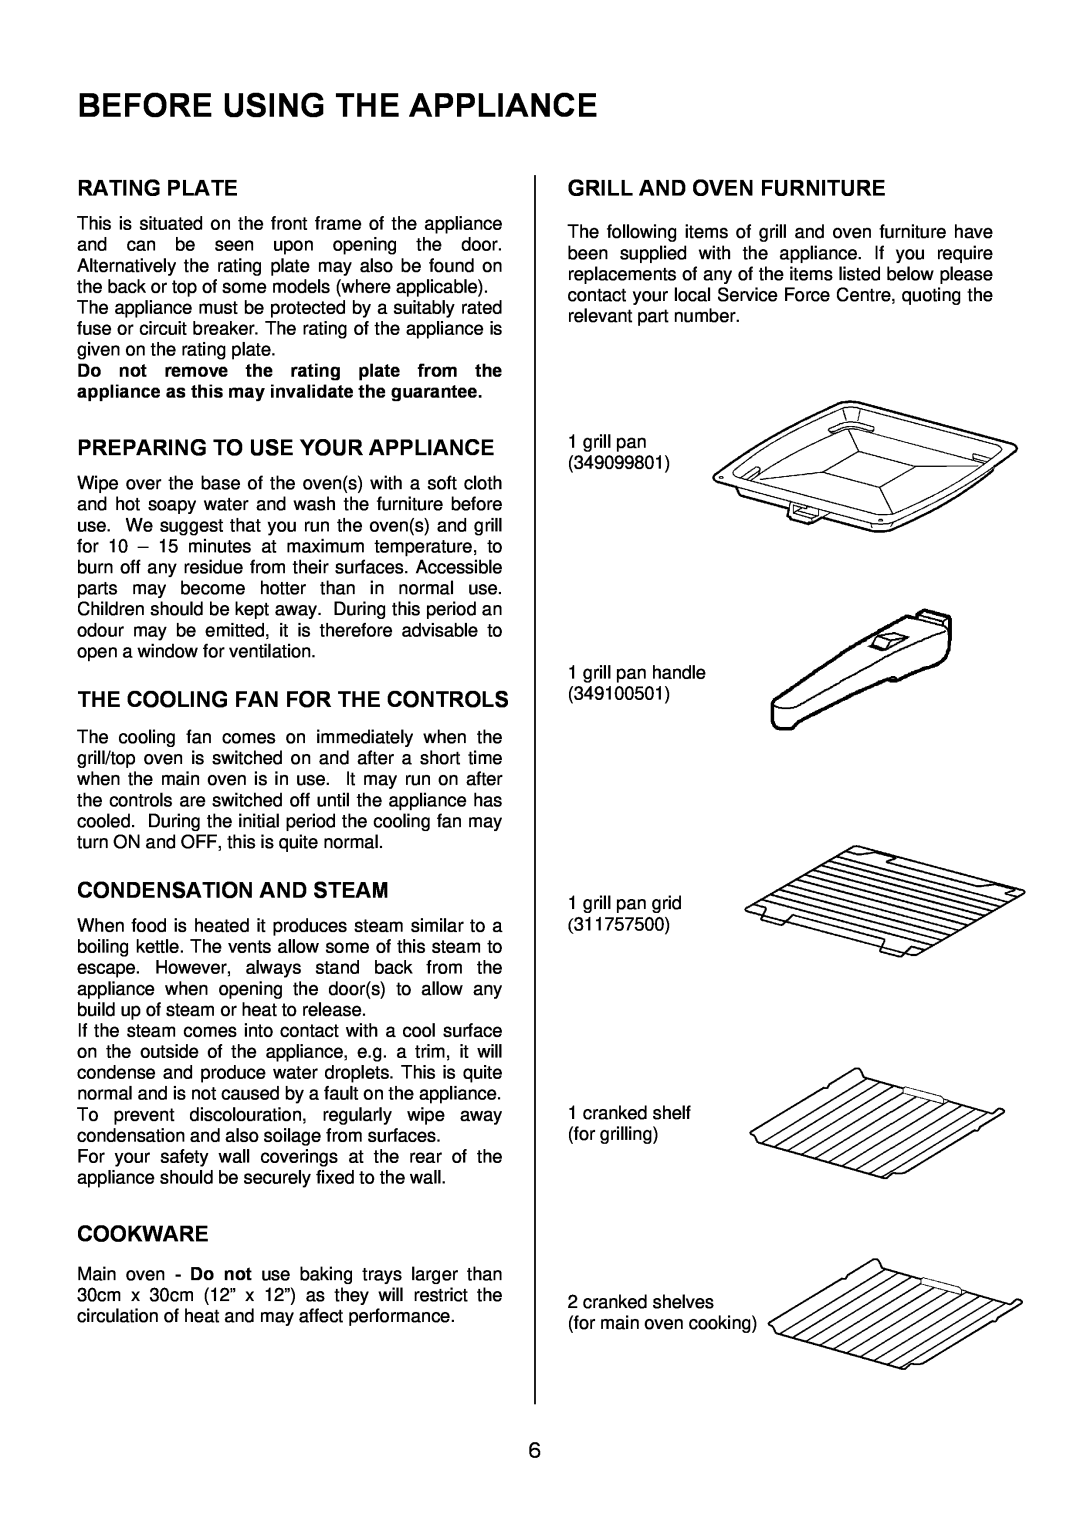 Electrolux EKG5543 manual Before Using The Appliance, Rating Plate, Preparing To Use Your Appliance, Condensation And Steam 